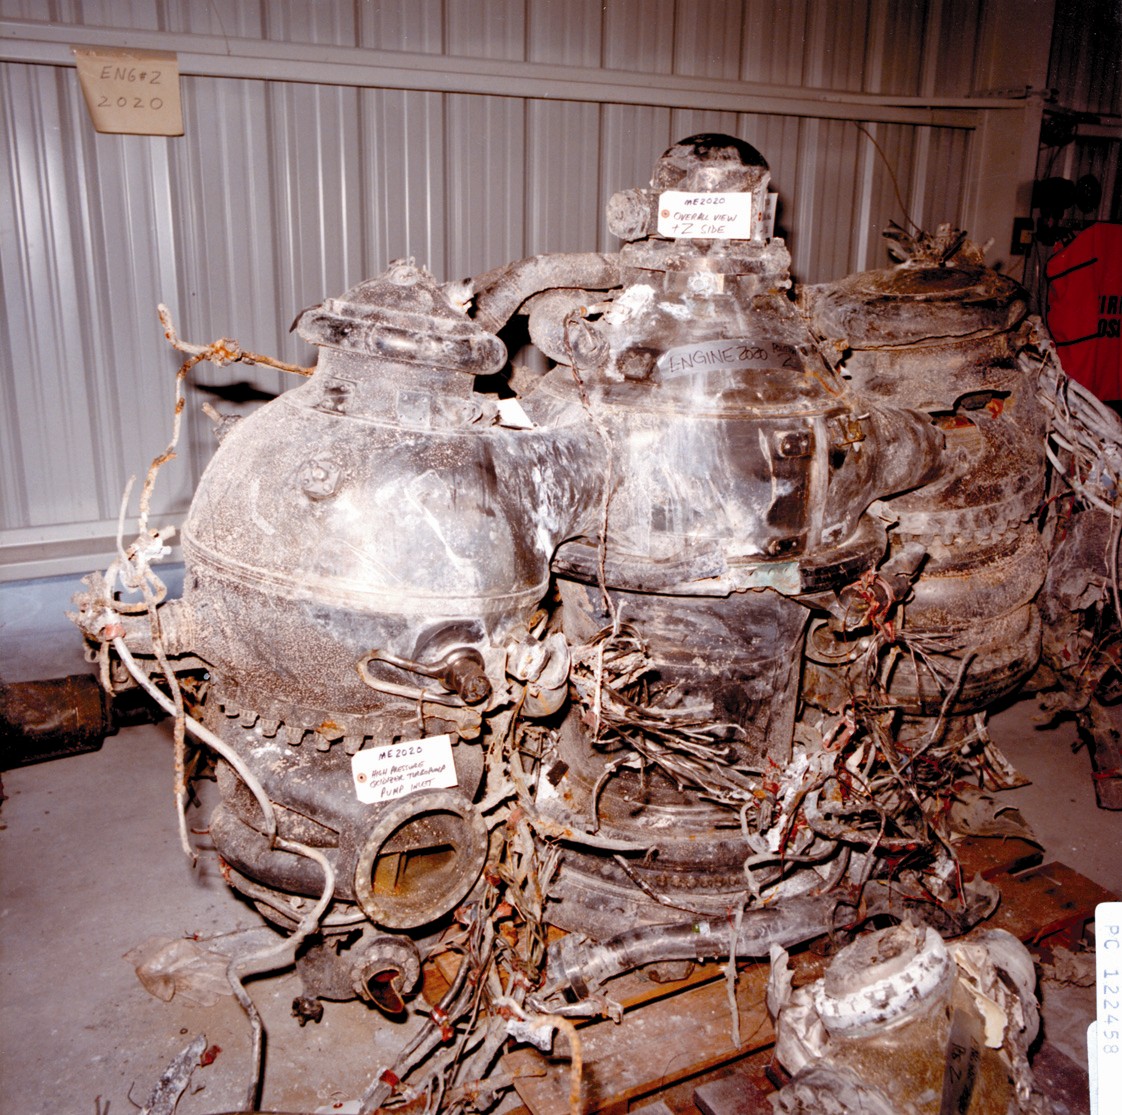 Challenger Explosion - Recovered Main Engines